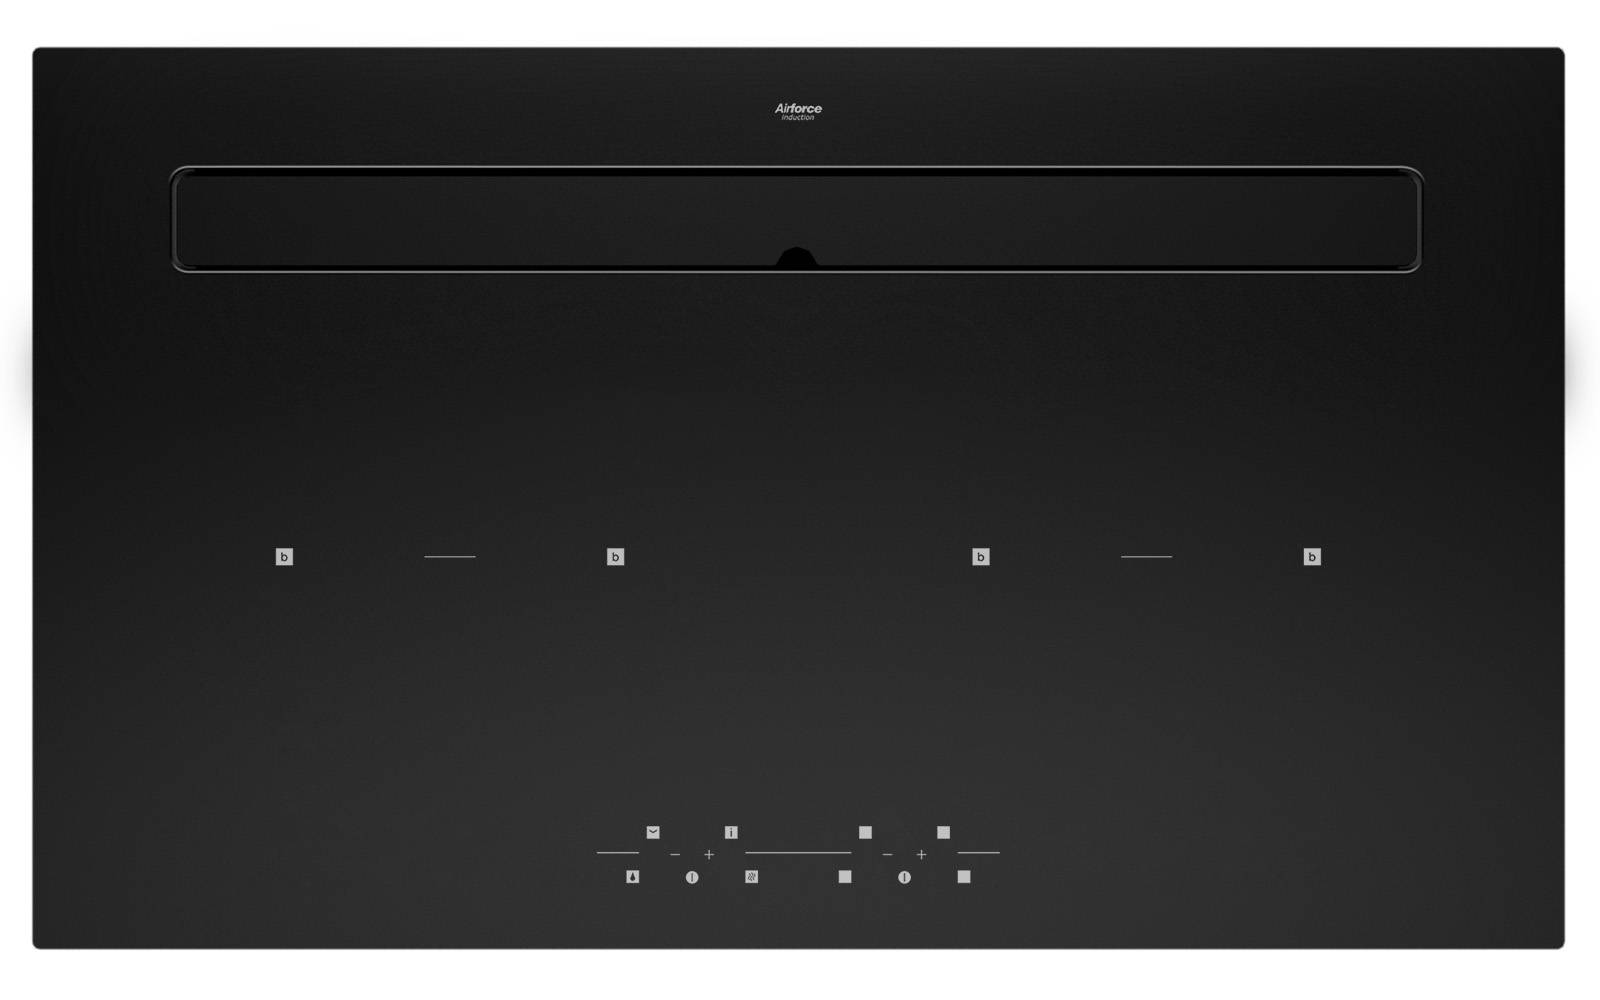 Airforce Aspira Slim Easy 90cm Induction hob with Rear Downdraft Extraction